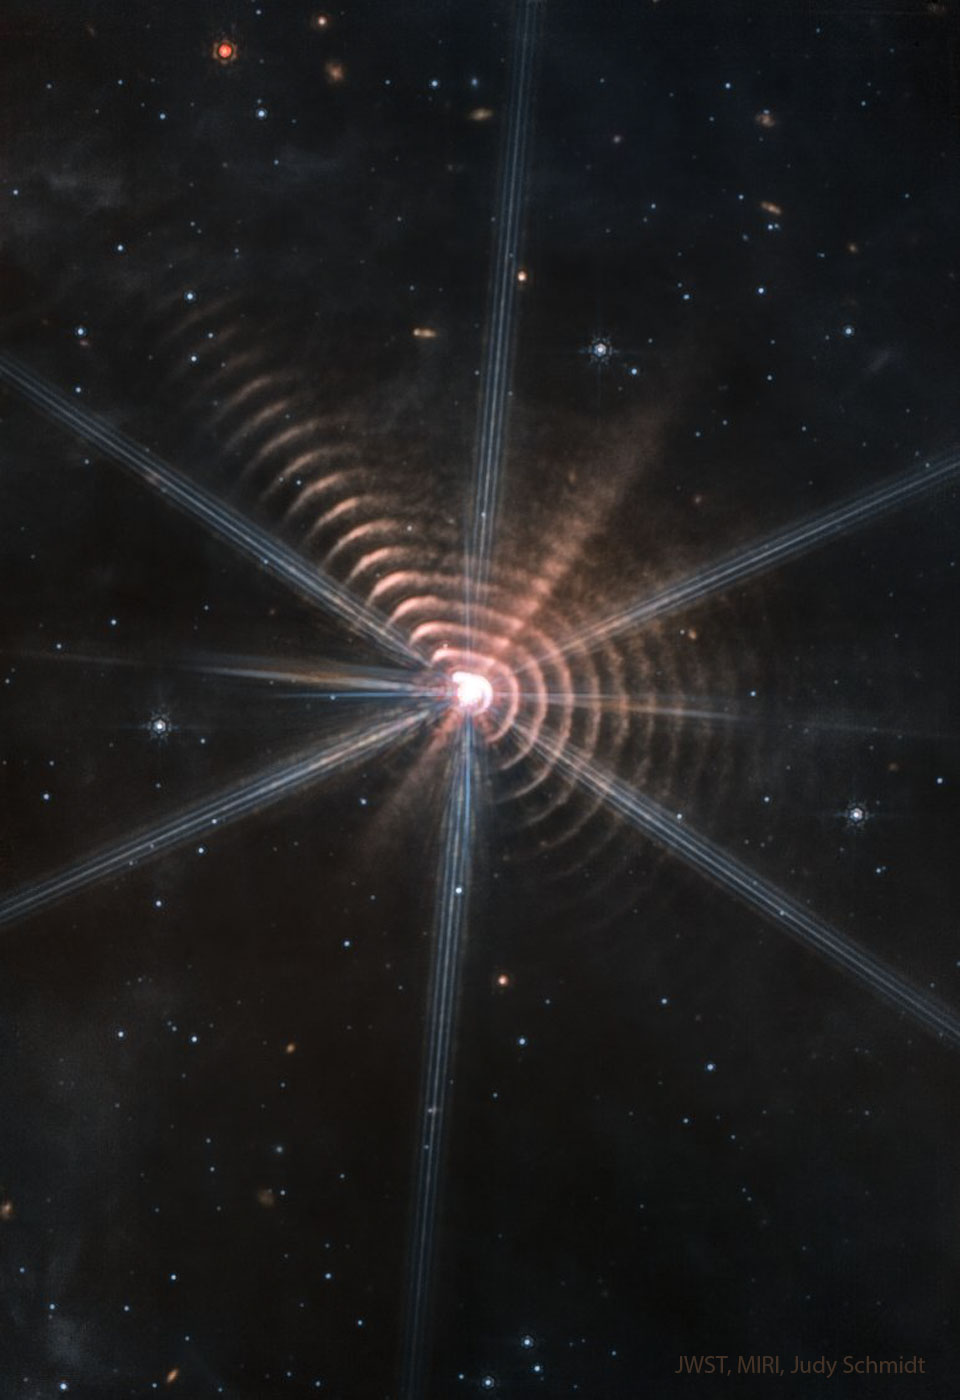 The featured image shows many circular rings 
surrounding a central star. Other stars are visible in
an otherwise dark field.
Please see the explanation for more detailed information.